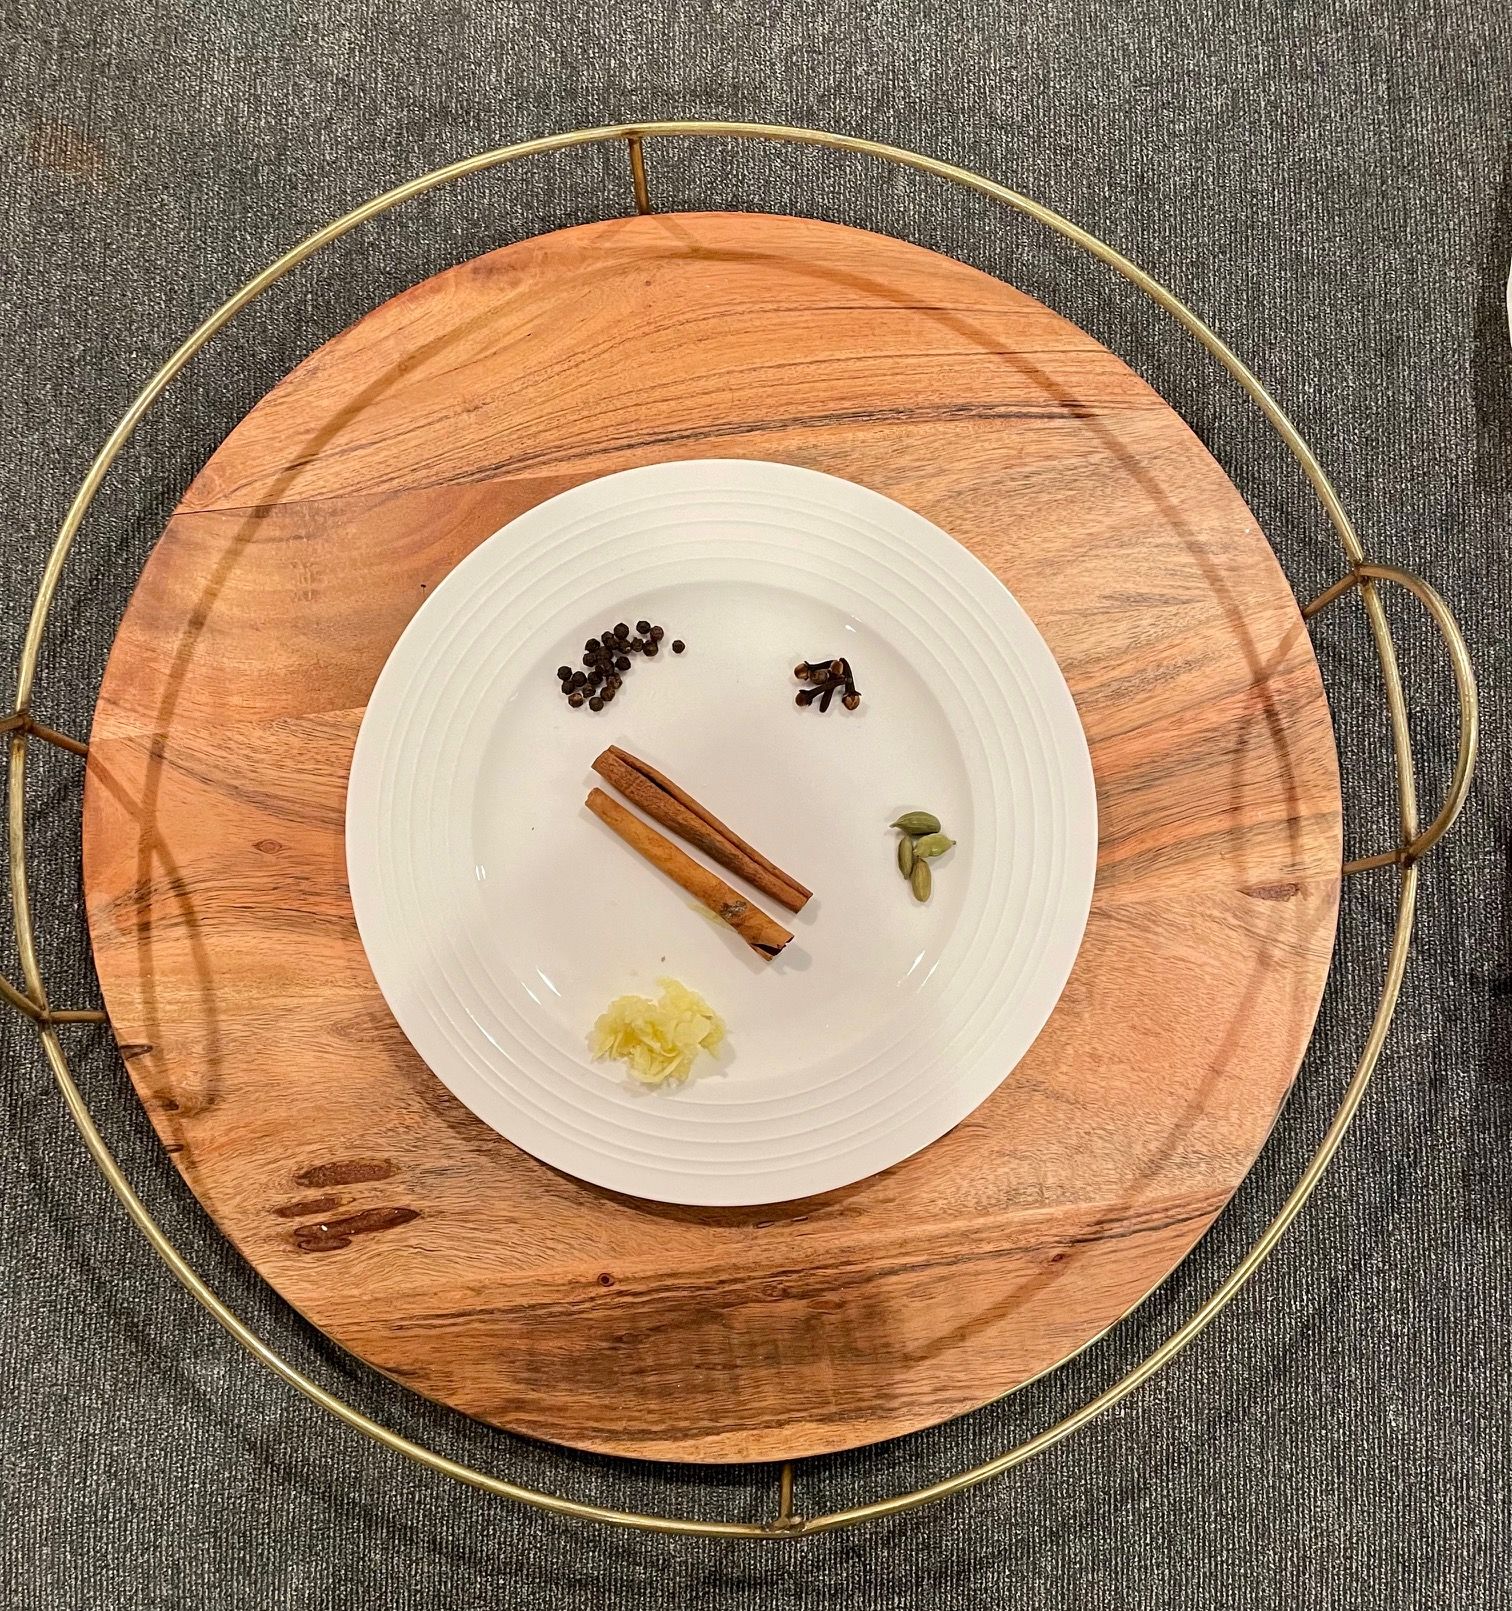 chai spice ingredients on a plate